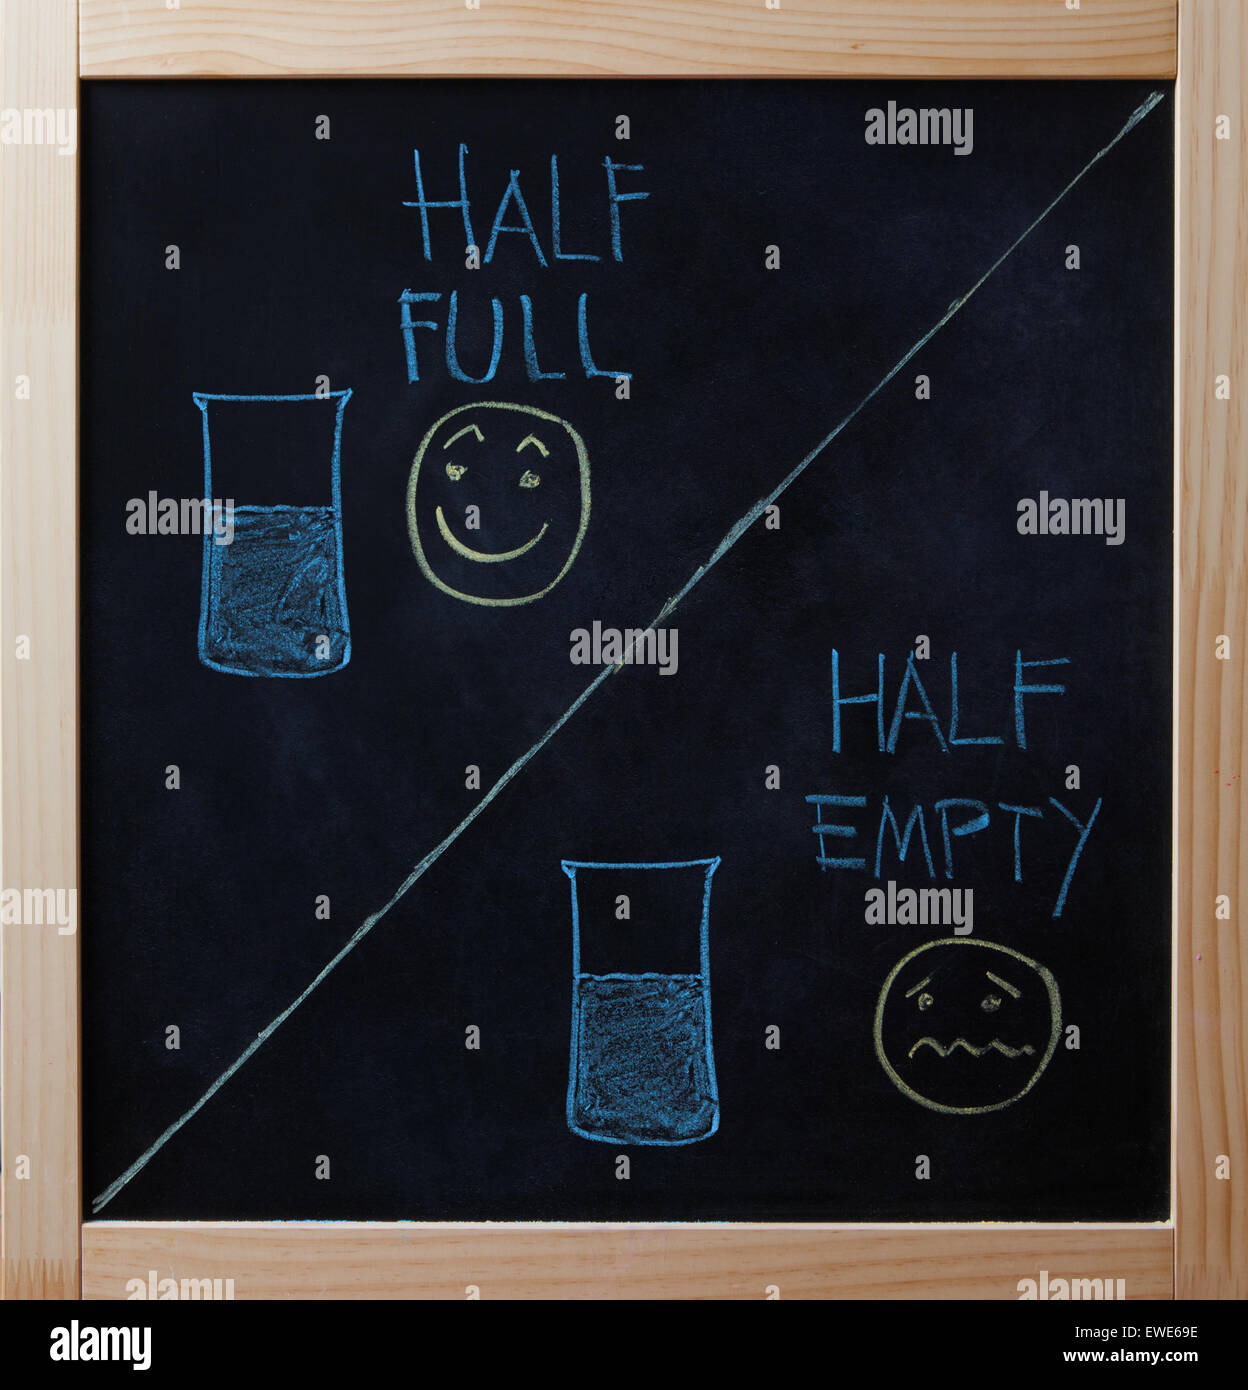 Half full and half empty concept with smileys drawn on blackboard. Stock Photo